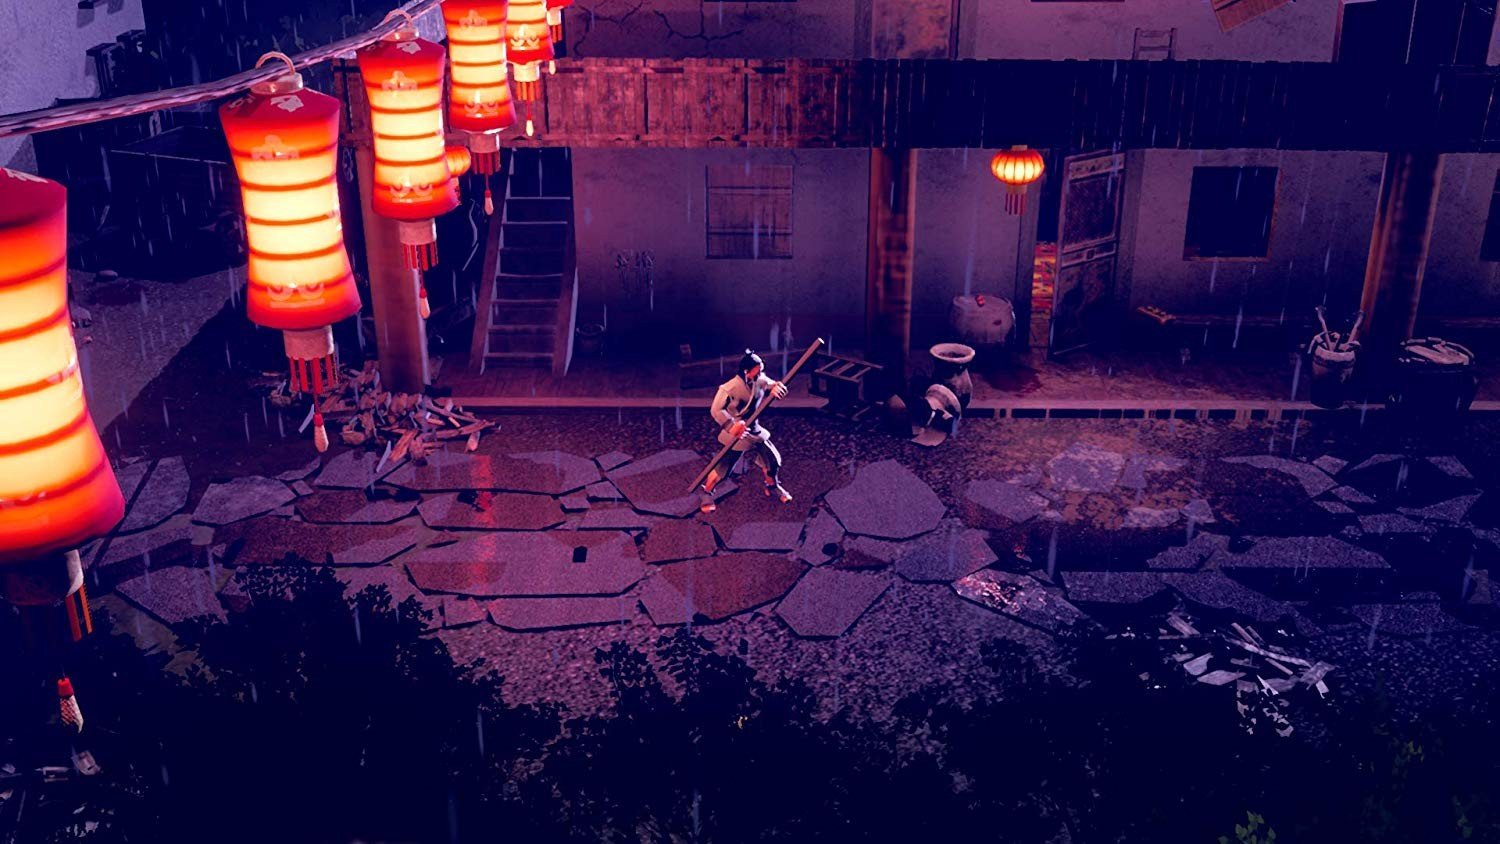 9 monkeys of Shaolin,switch, nintendo switch,playstation 4, ps4,xone, xbox one, europe, release date, gameplay, features, price, pre-order now,sobaka studio, buka entertainment